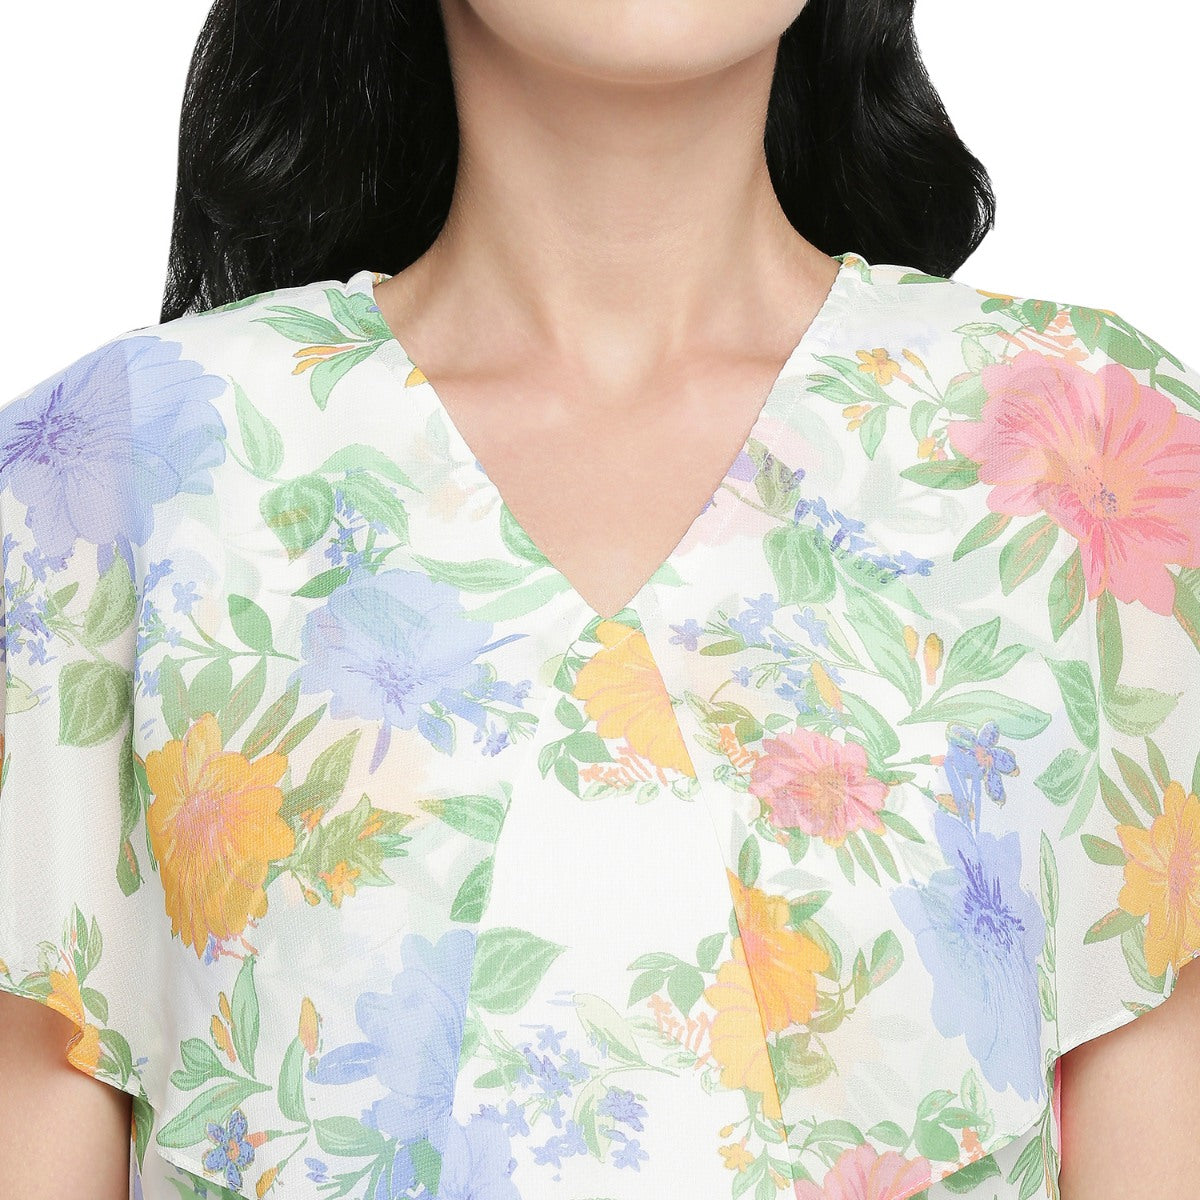 Mantra white floral printed butter-fly sleeve dress.